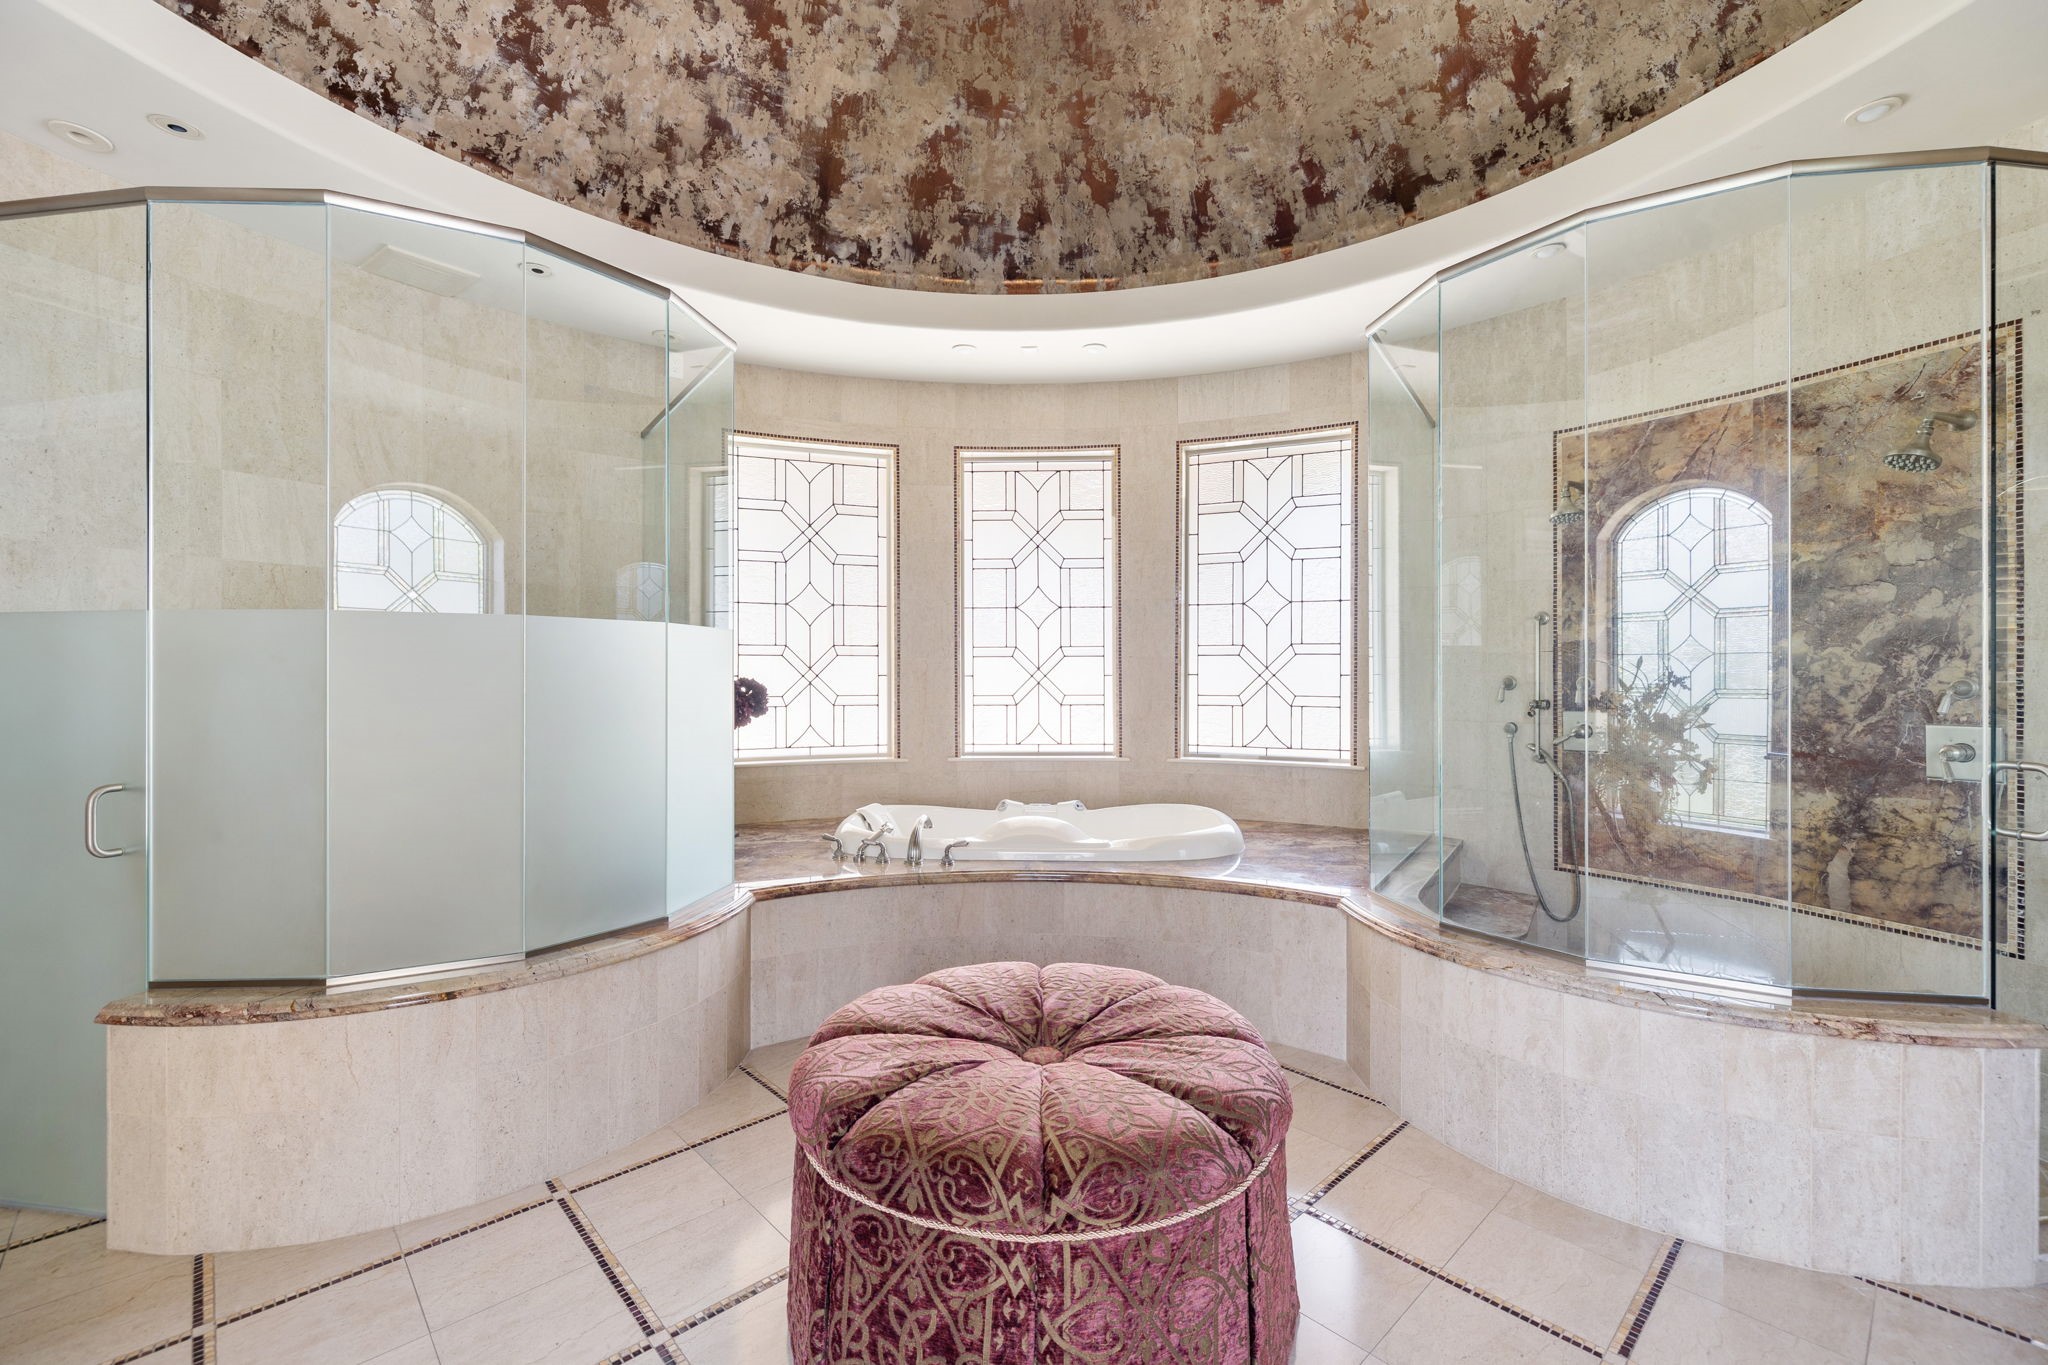 The Master Bathing Spa features an oversized walk-in Shower with dual shower heads, and shower wand, a private Water Closet, dual Vanities and sinks, plus another series of leaded glass windows that afford privacy and light in the same space.